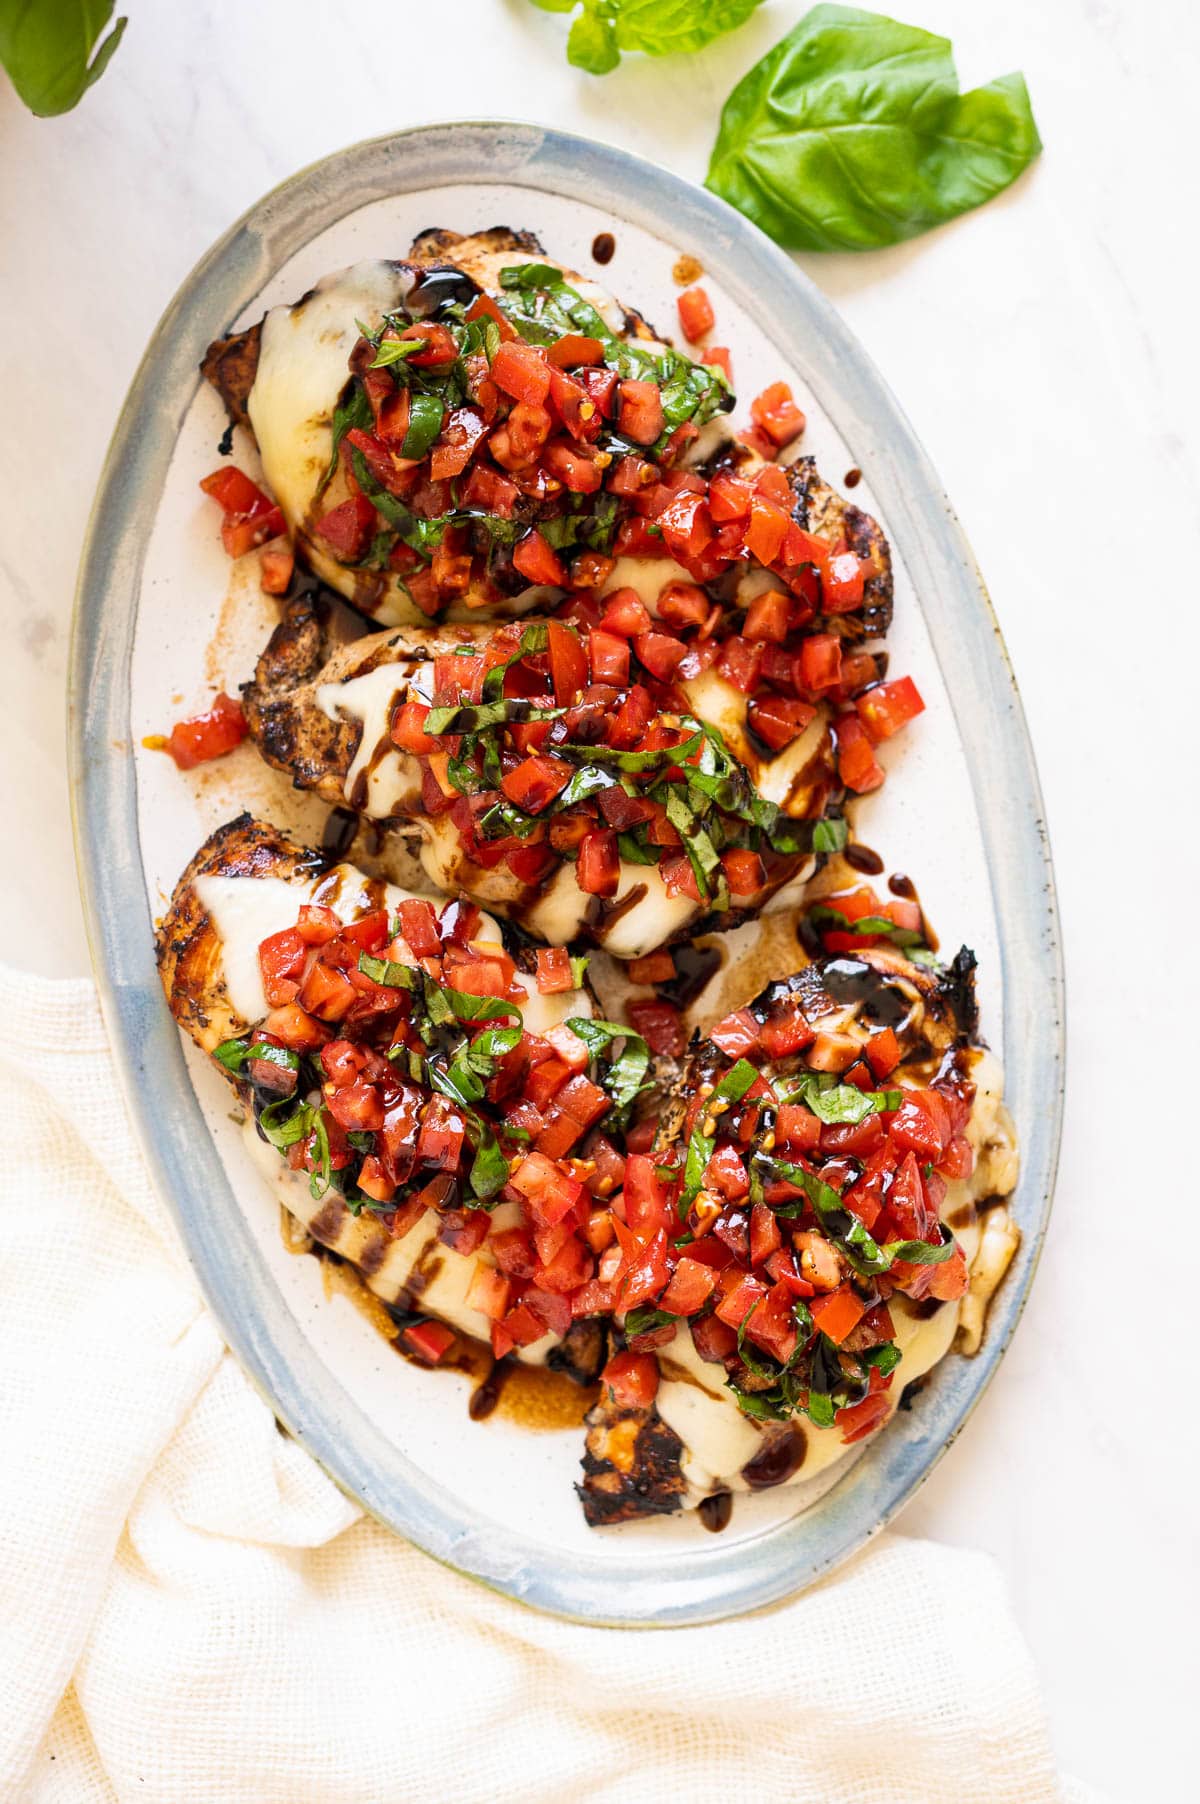 Grilled chicken breasts topped with melted cheese and bruschetta served on a platter.